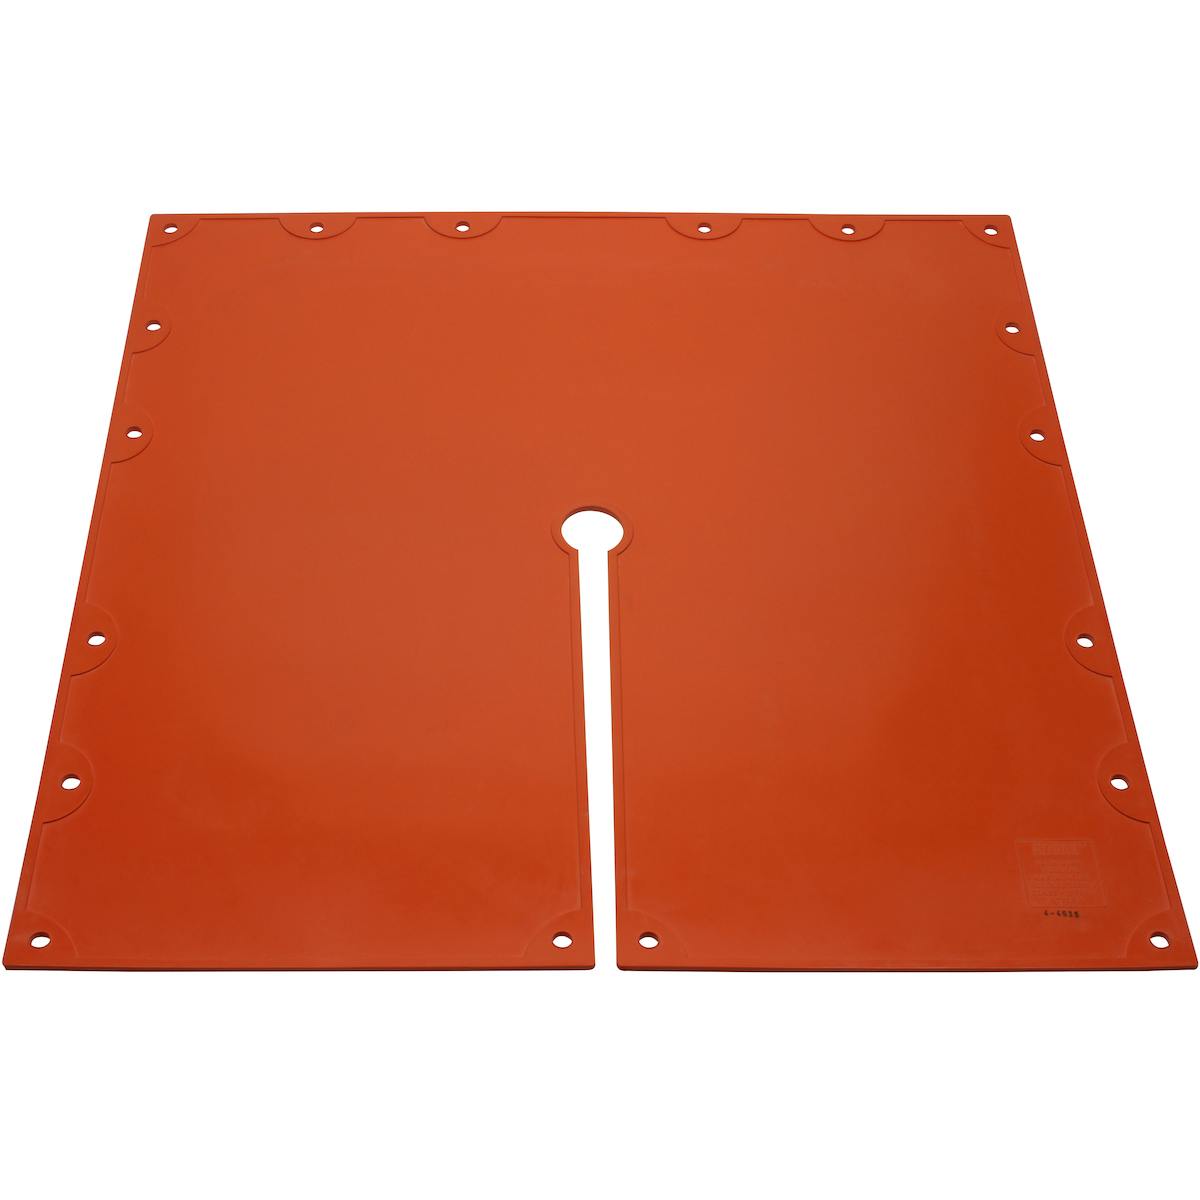 Class 4 Slotted Rubber Insulating Blanket, Orange (188-4) - OS_0